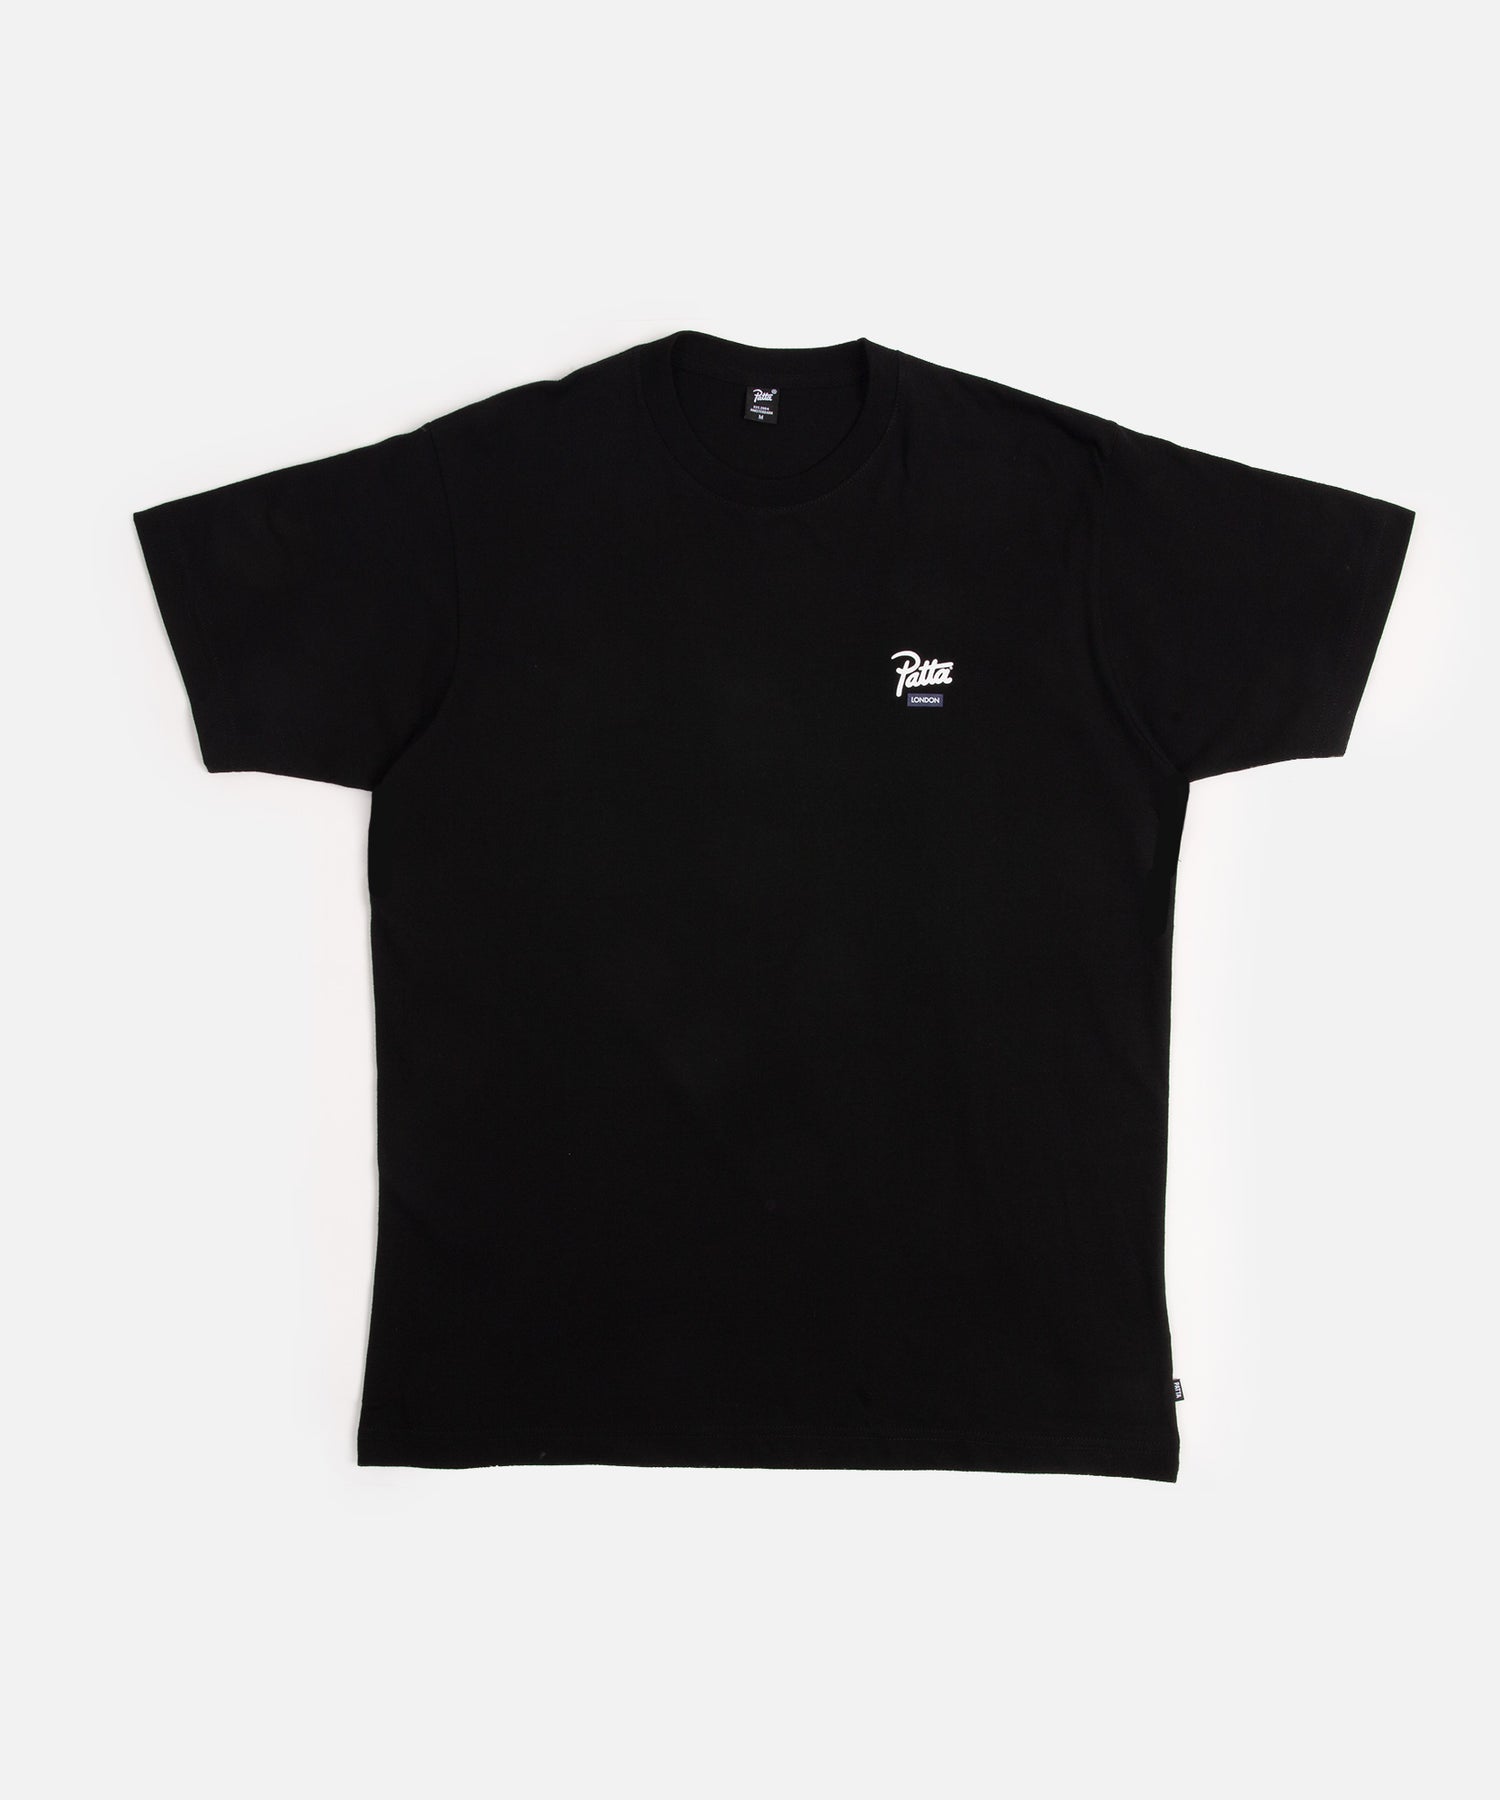 IN-STORE EXCLUSIVE: Patta London Chapter T-Shirt (Black)